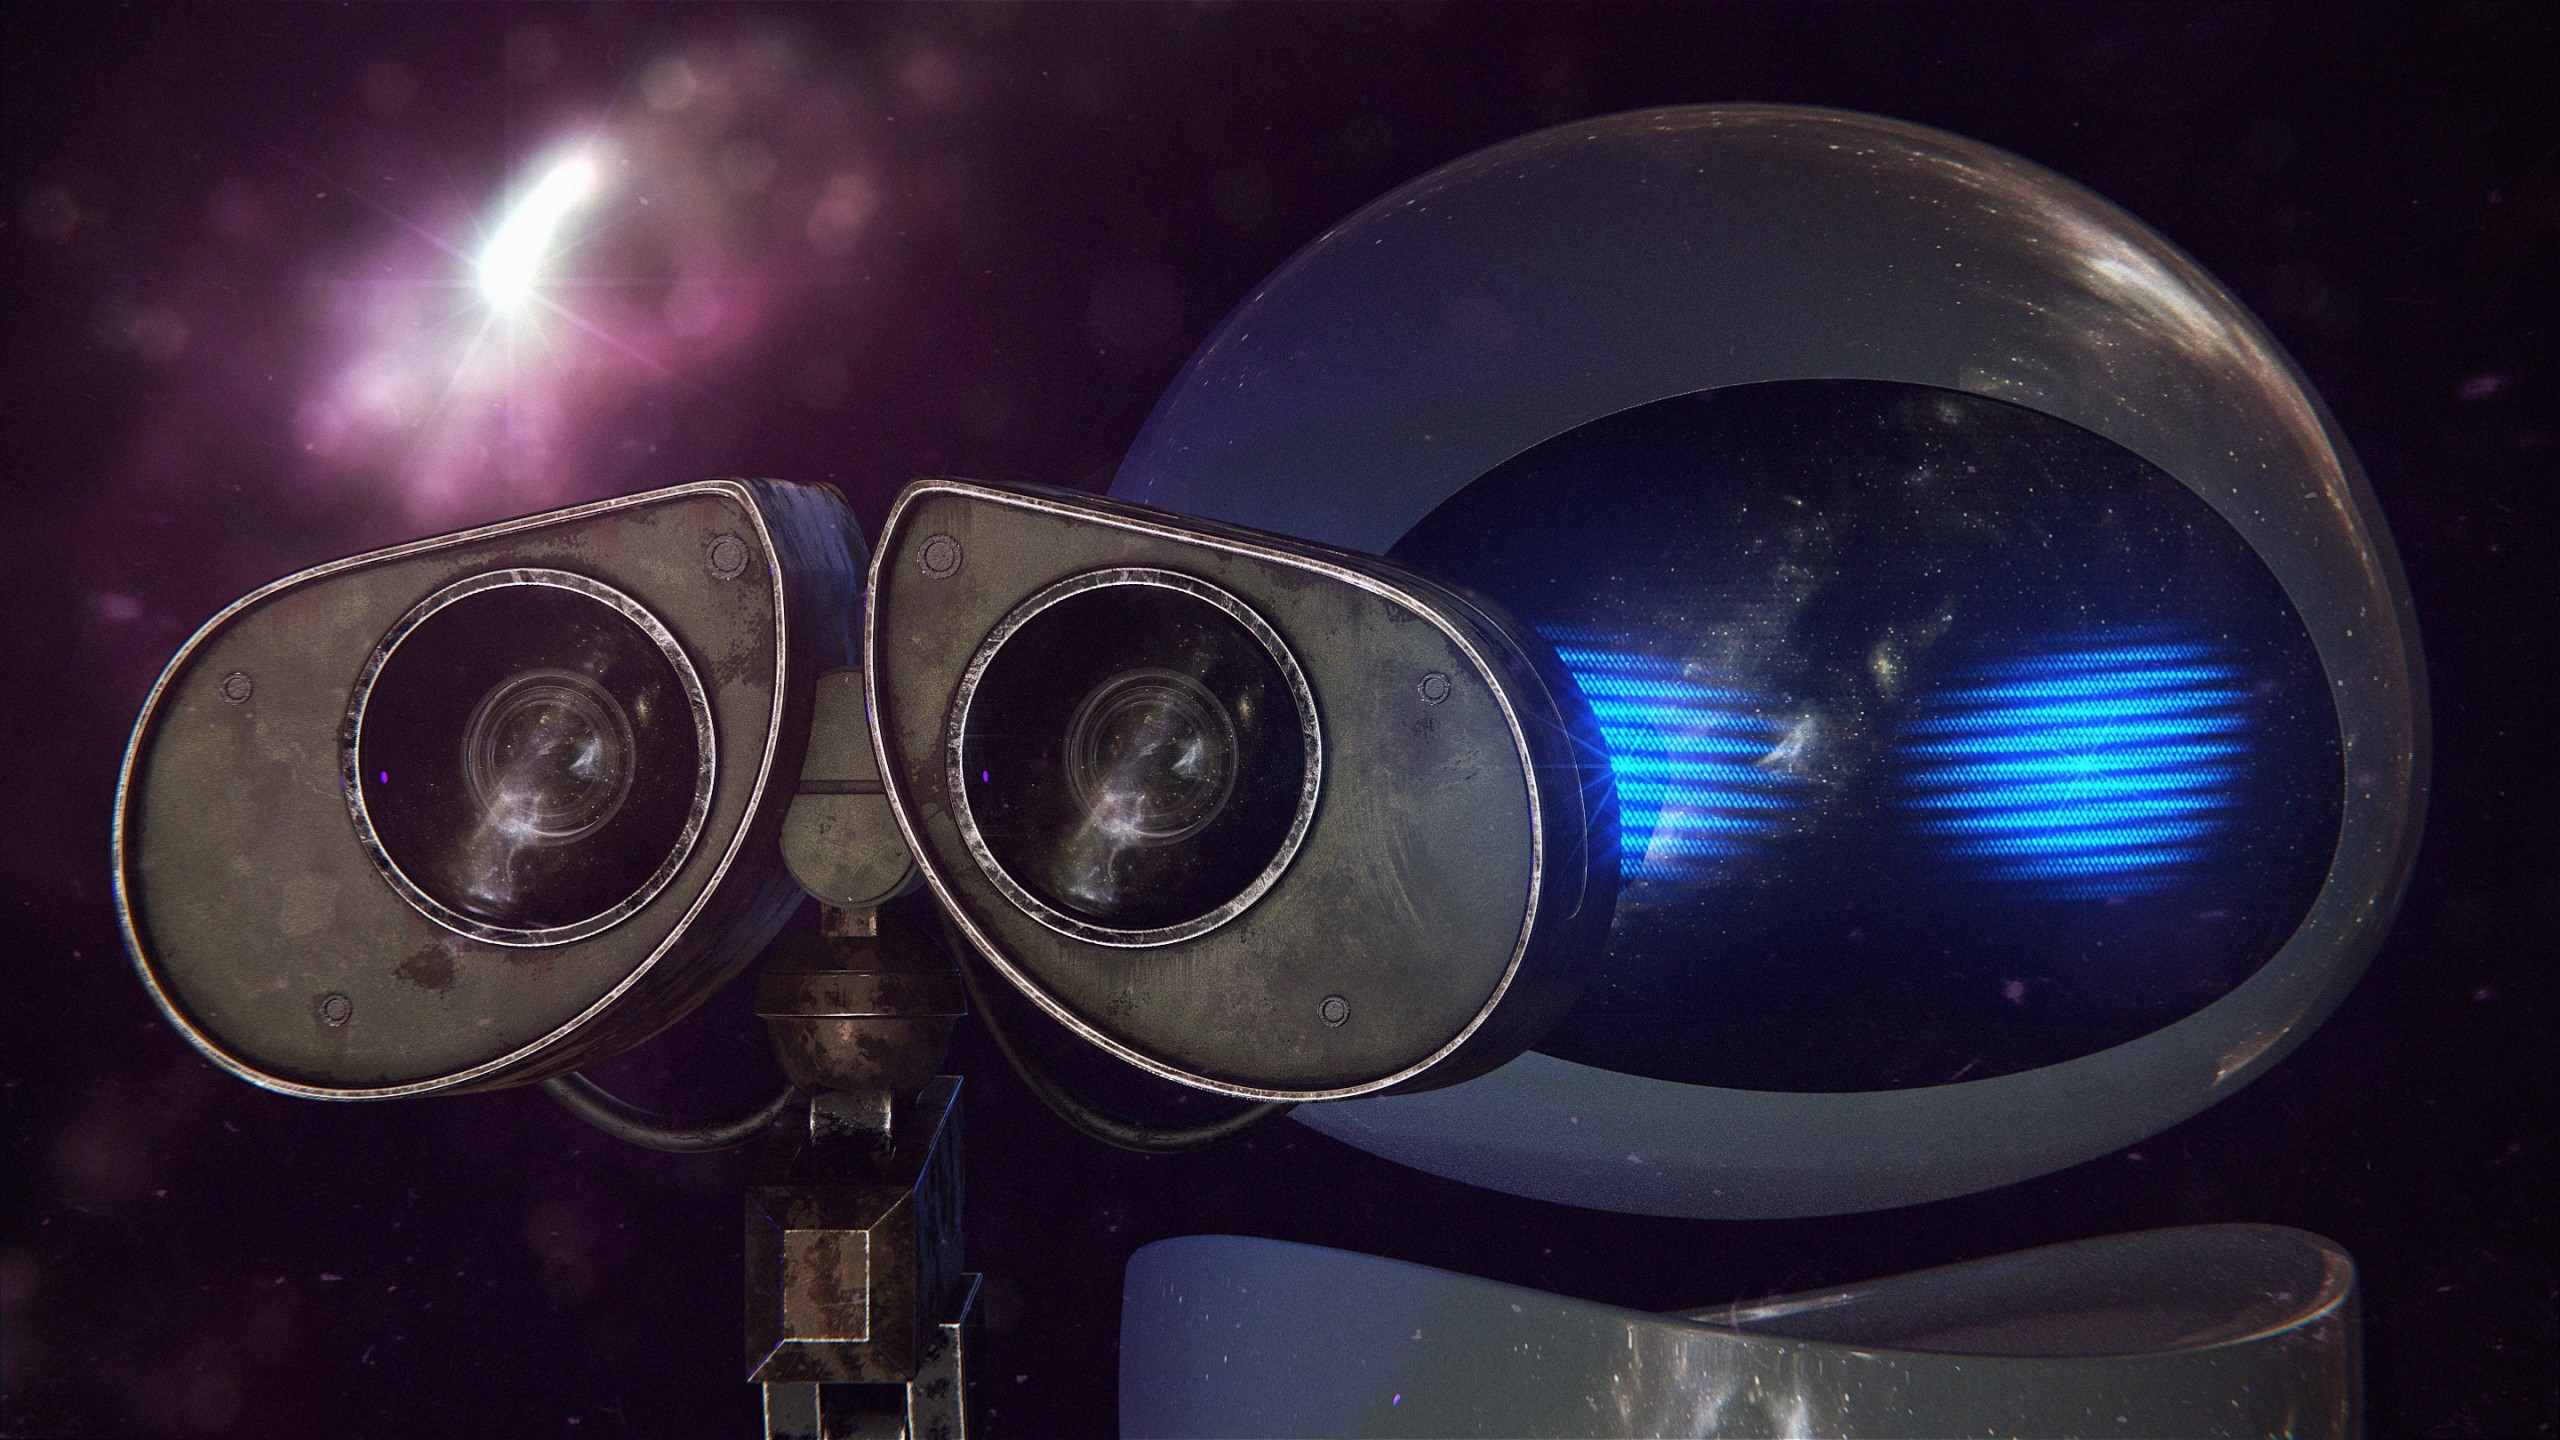 General 2560x1440 WALL-E Pixar Animation Studios space movies DeviantArt animated movies robot science fiction EVE (Movies)